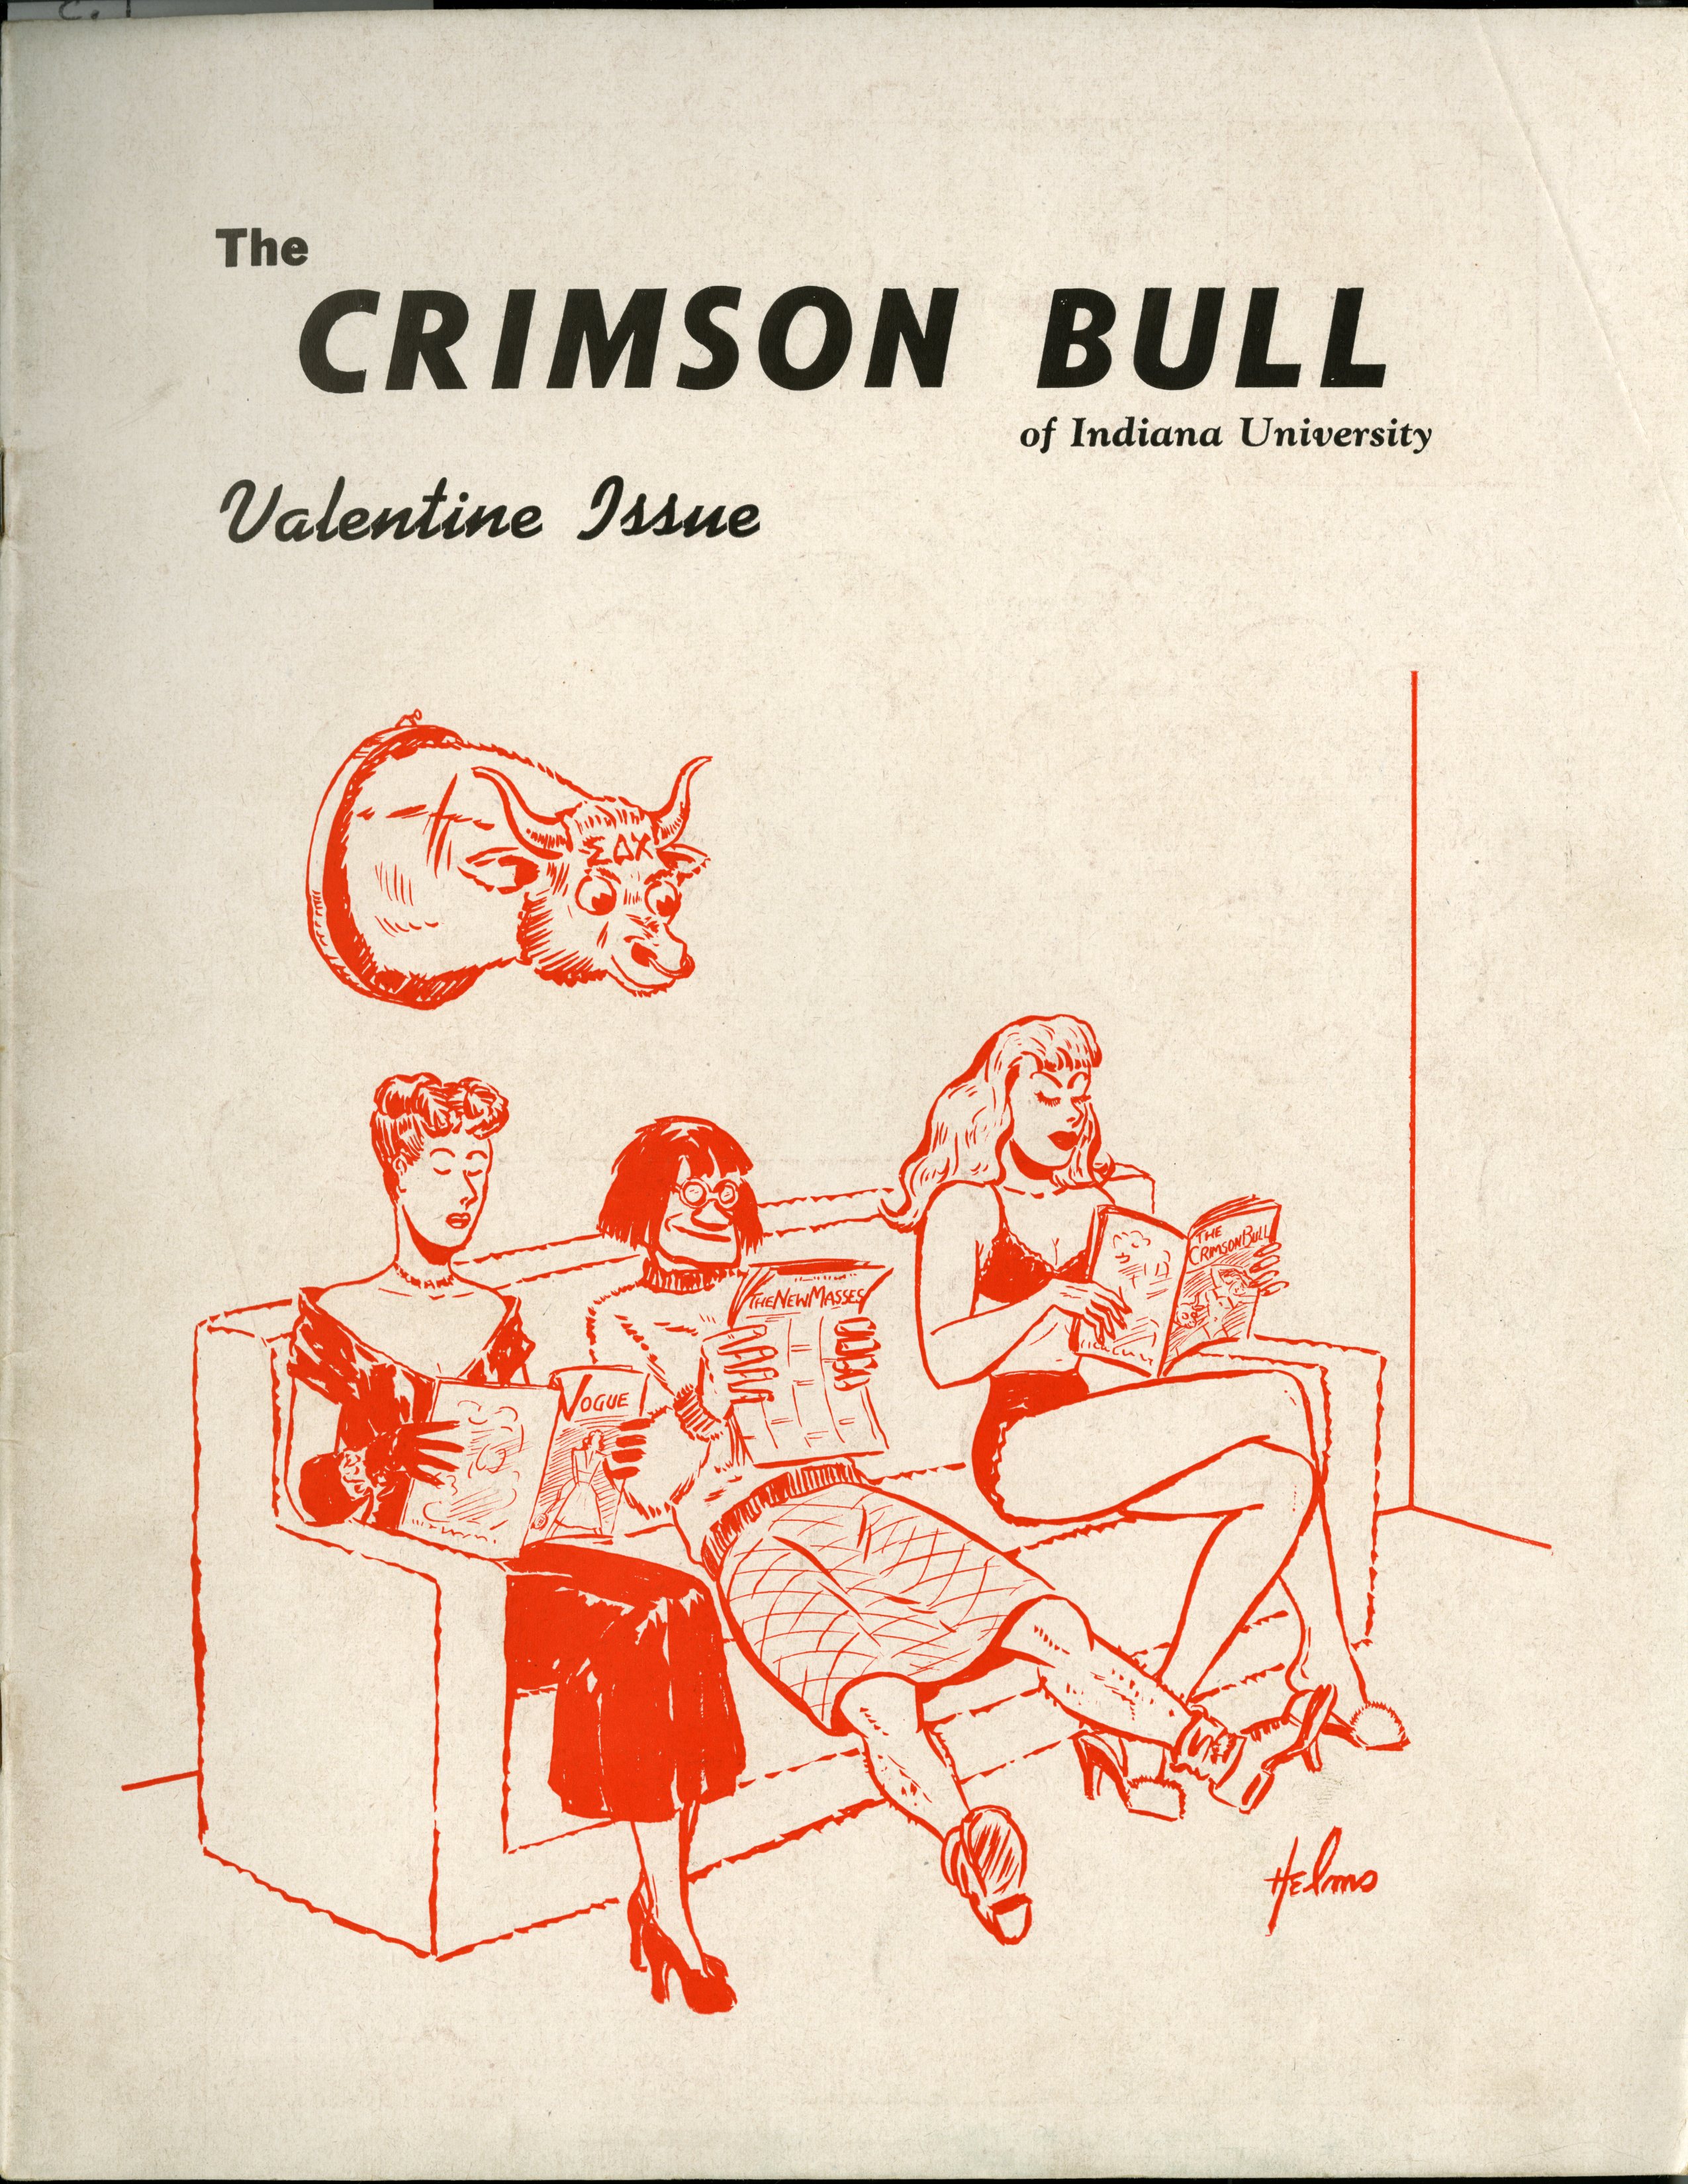 Cover of the 1948 Crimson Bull student magazine, featuring three women reading on a couch.